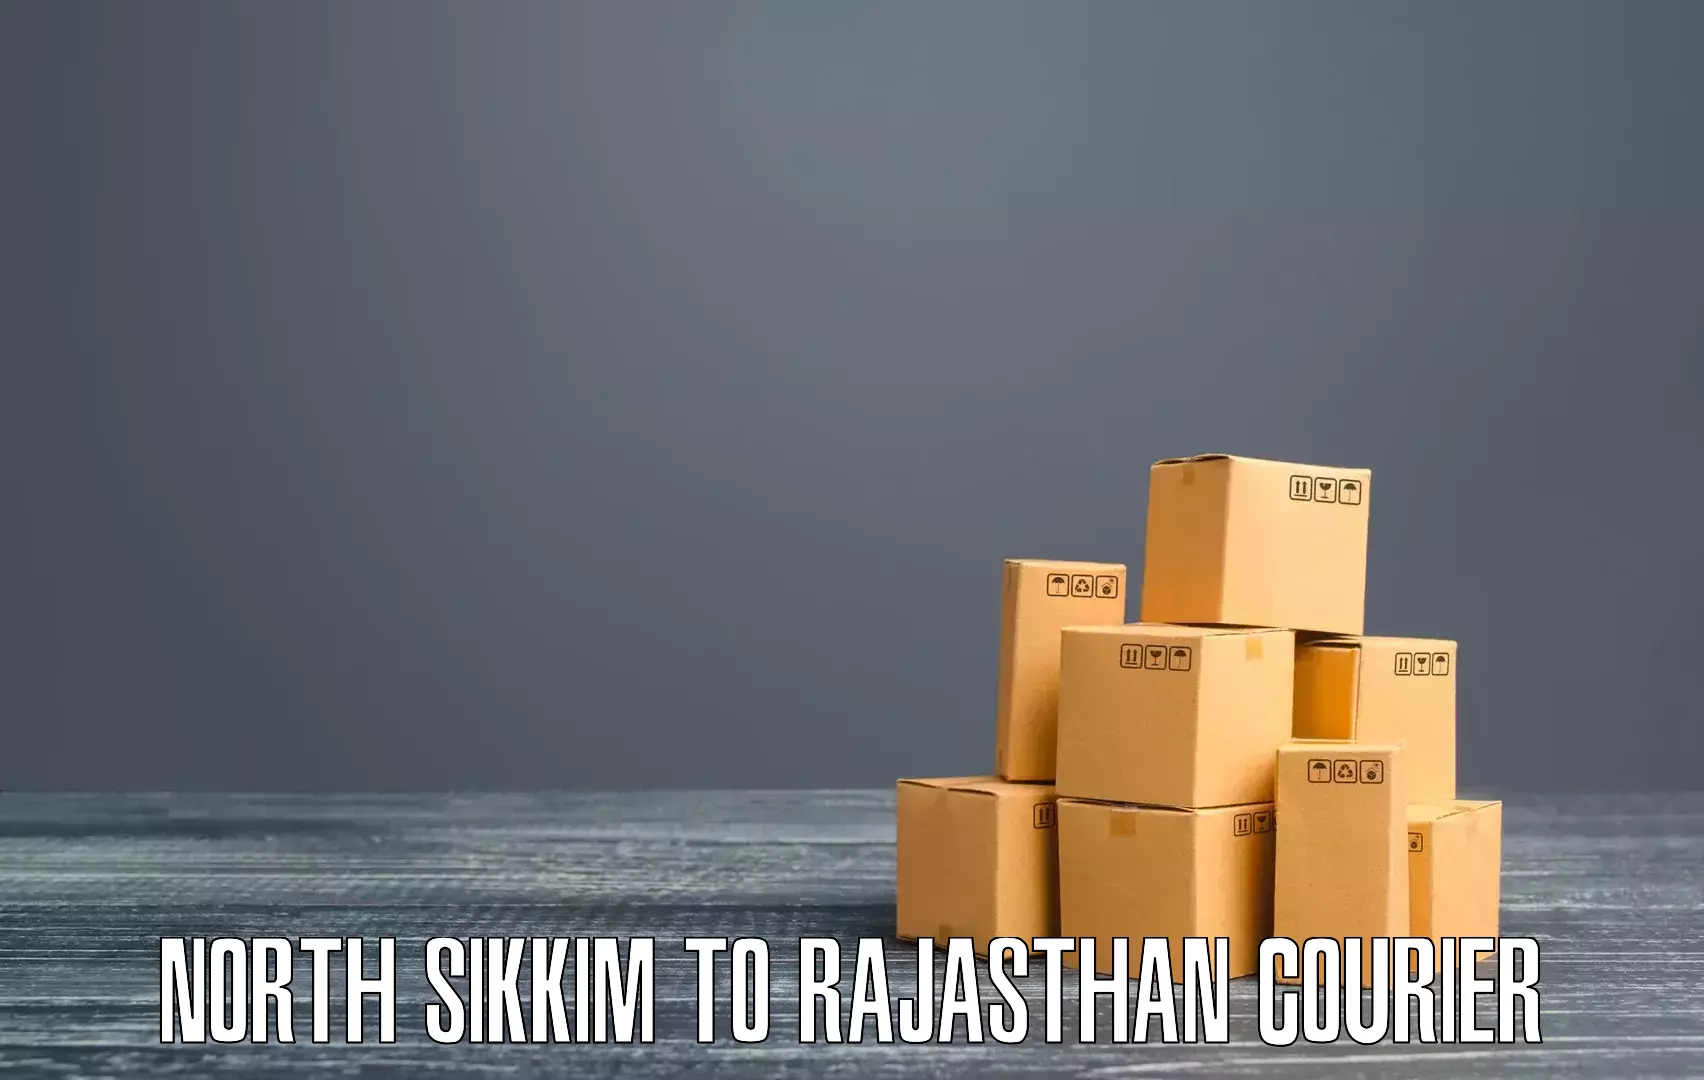 Online package tracking North Sikkim to Asind